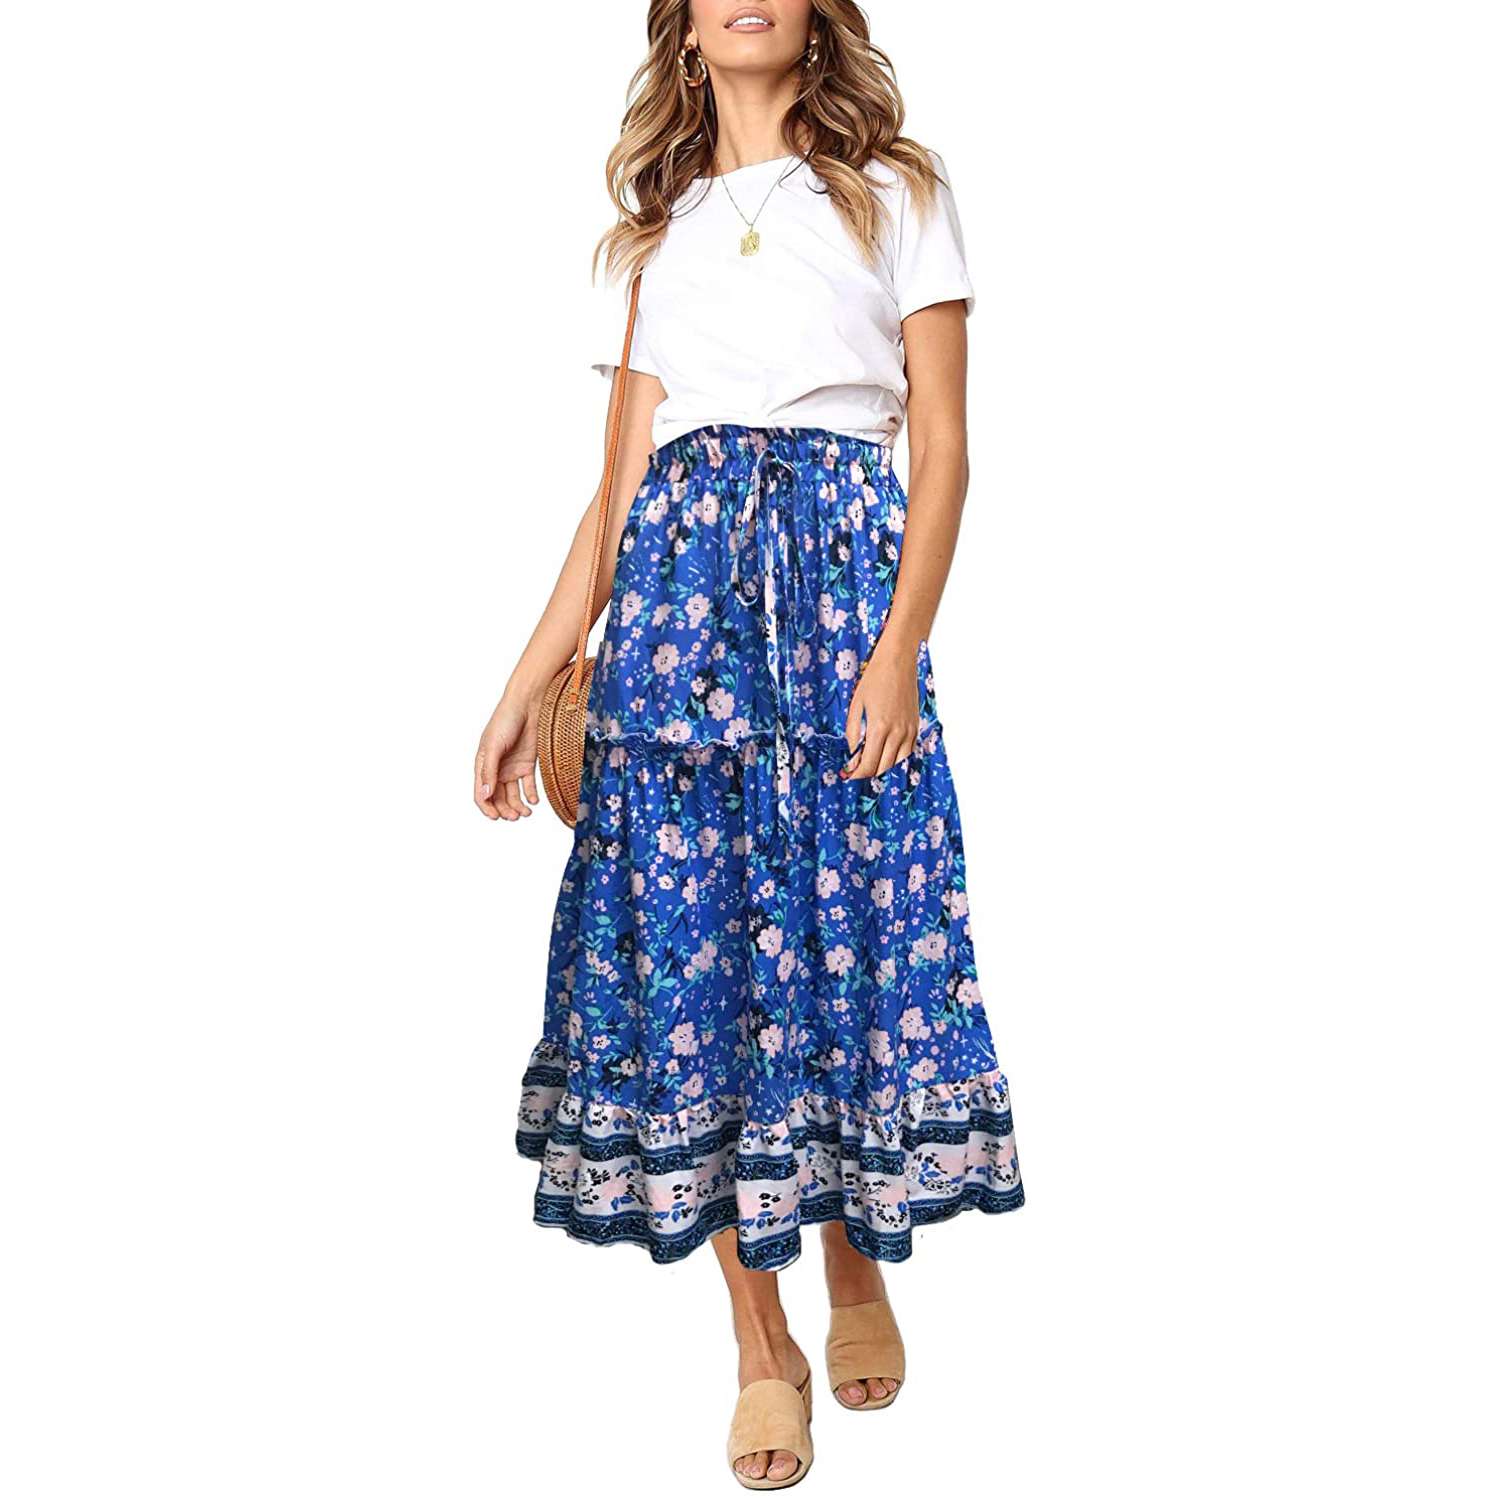 The Zesica Bohemian A-Line Maxi Skirt with Pockets Is $29 at Amazon ...